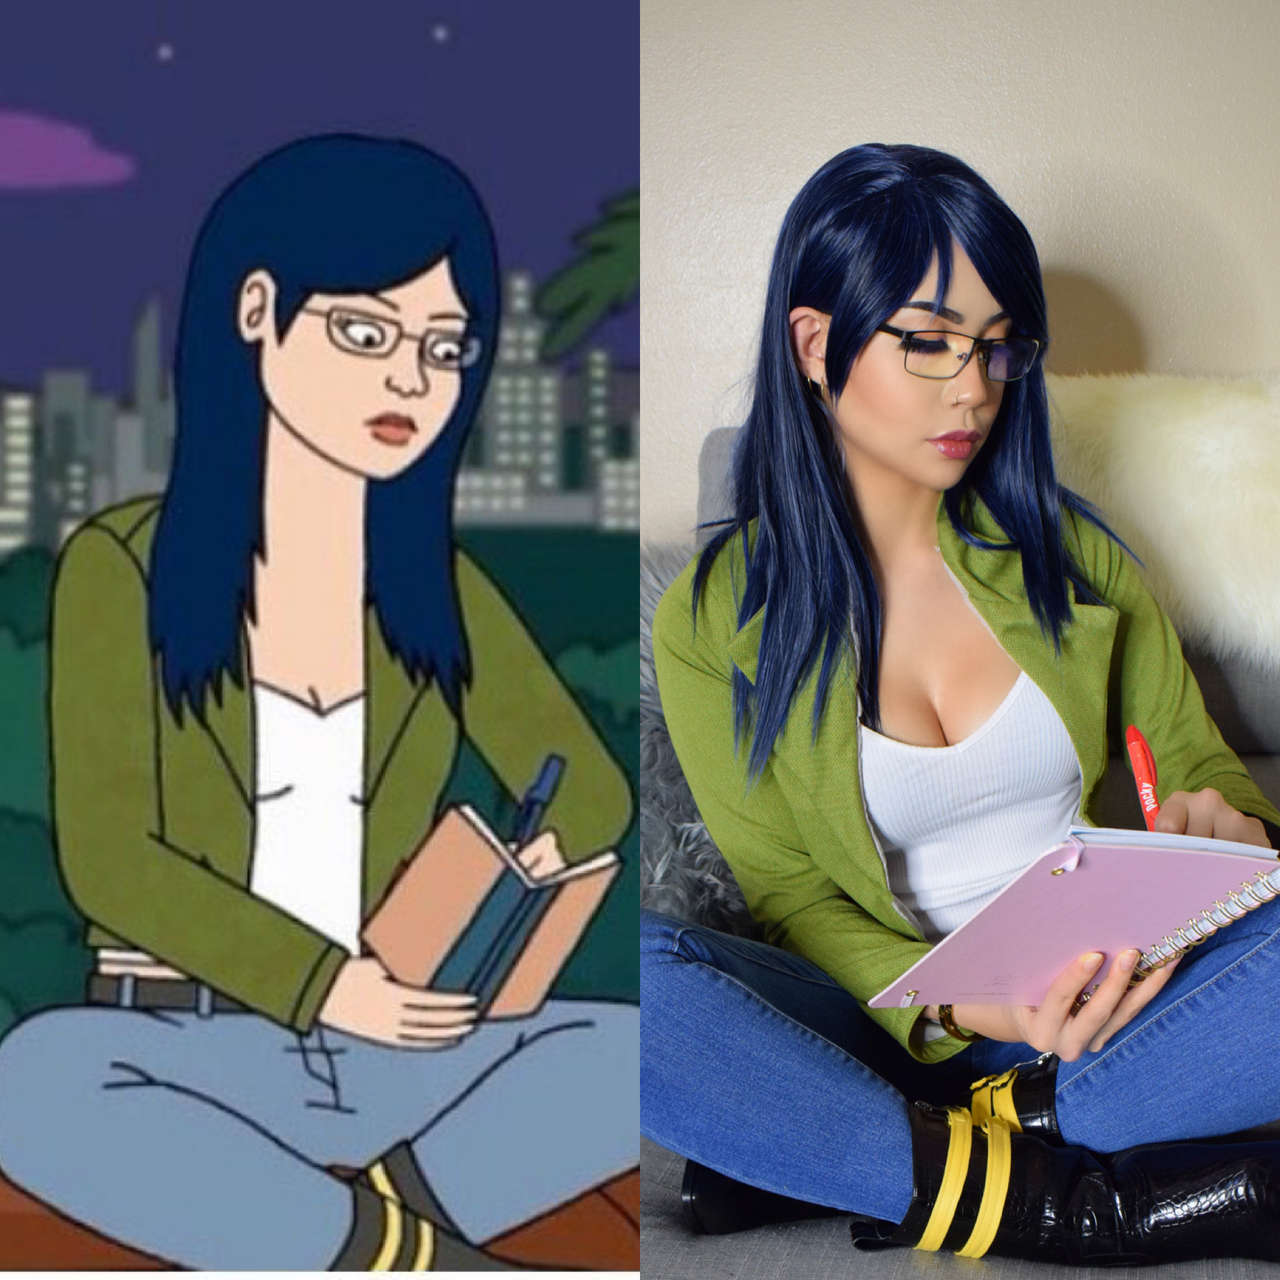 Diane Nguyen From Bojack Horseman Side By Side Cosplay By Felicia Vox 0